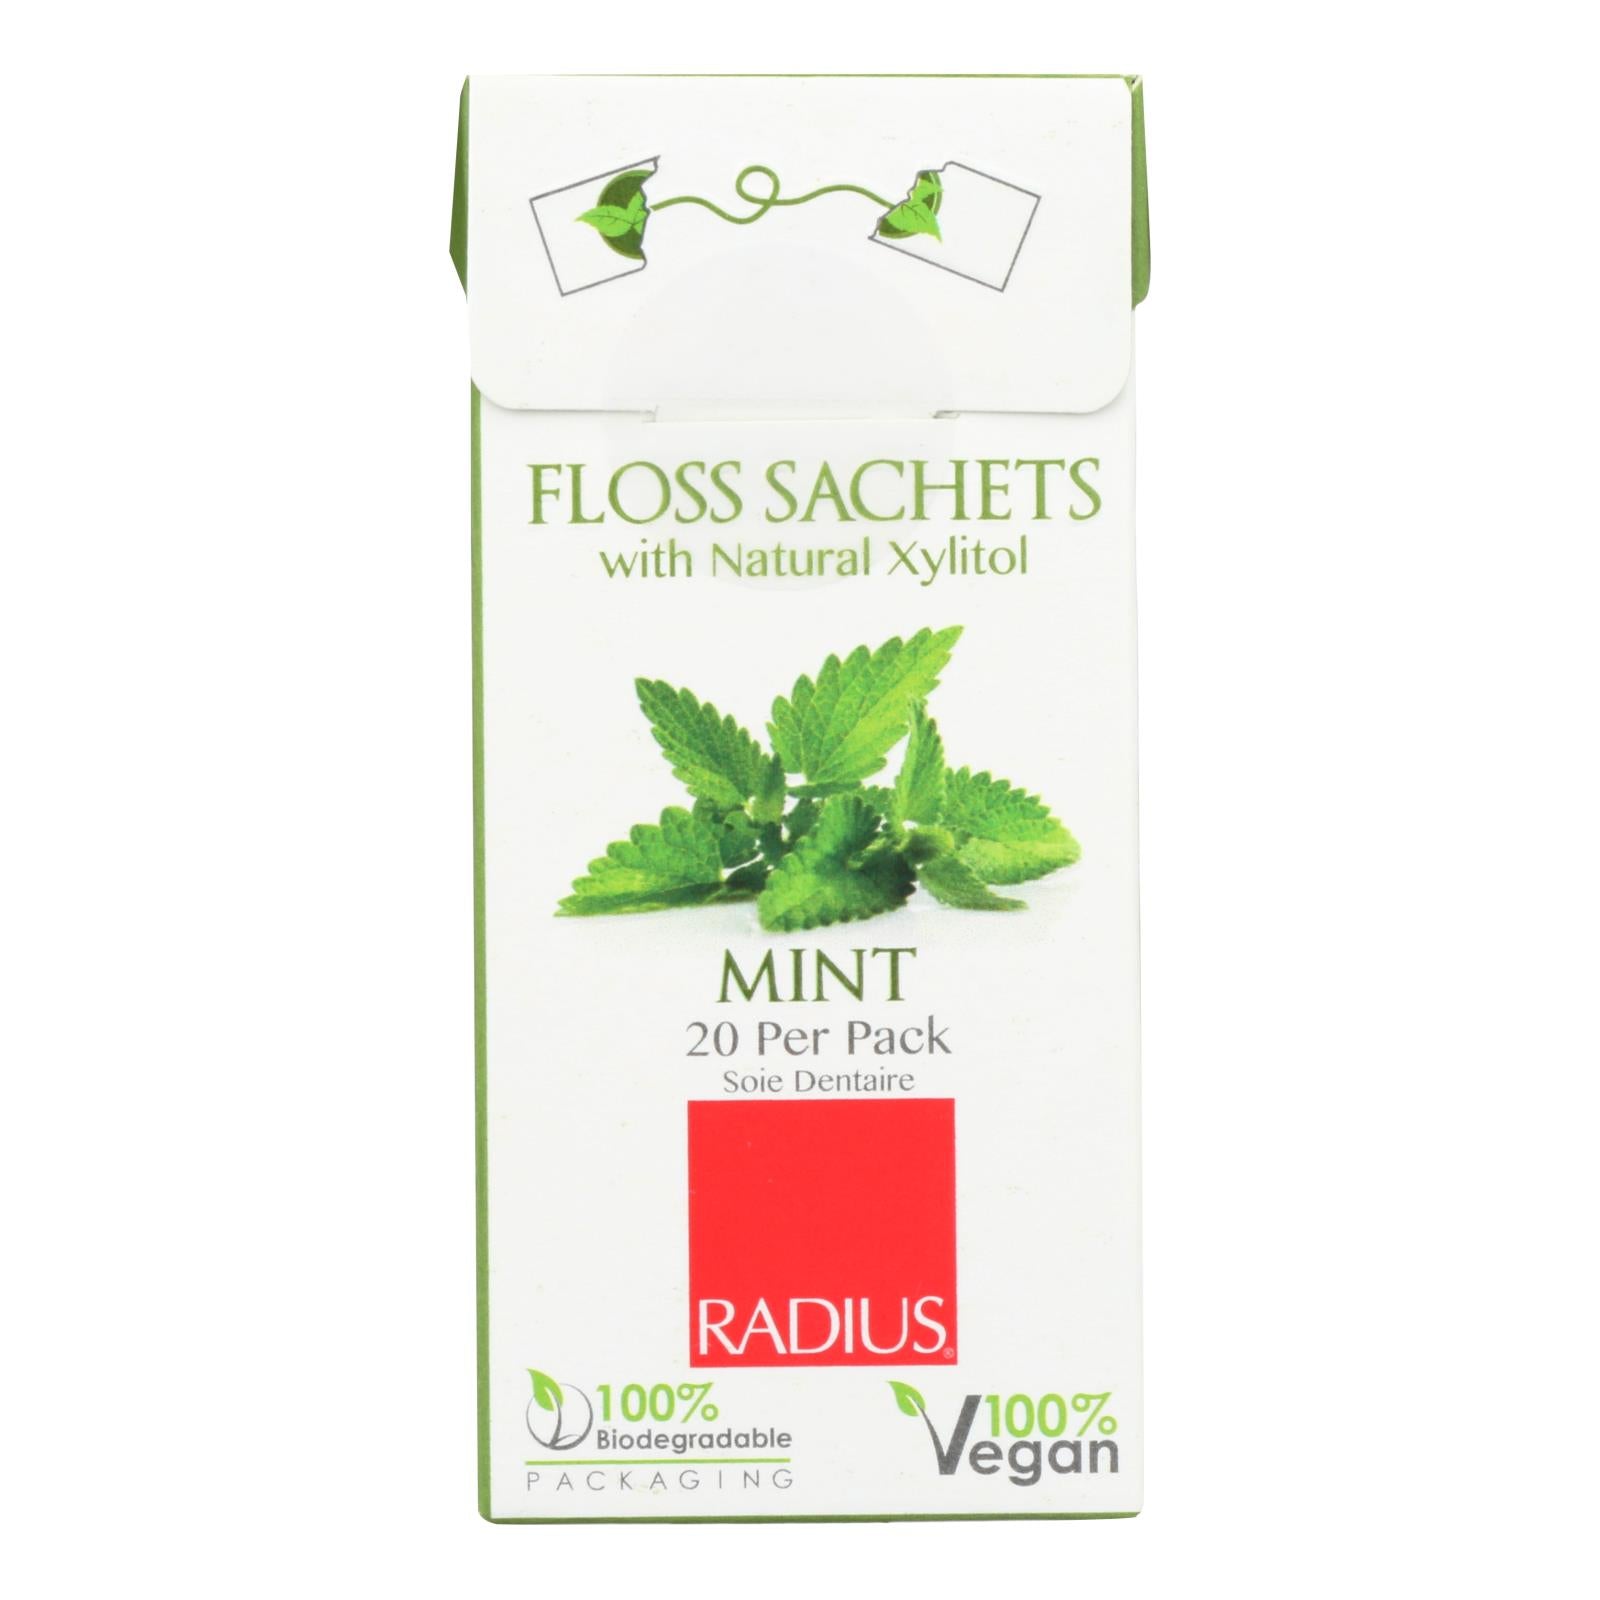 Radius Floss Sachets with Natural Xylitol (Pack of 20) - Mint